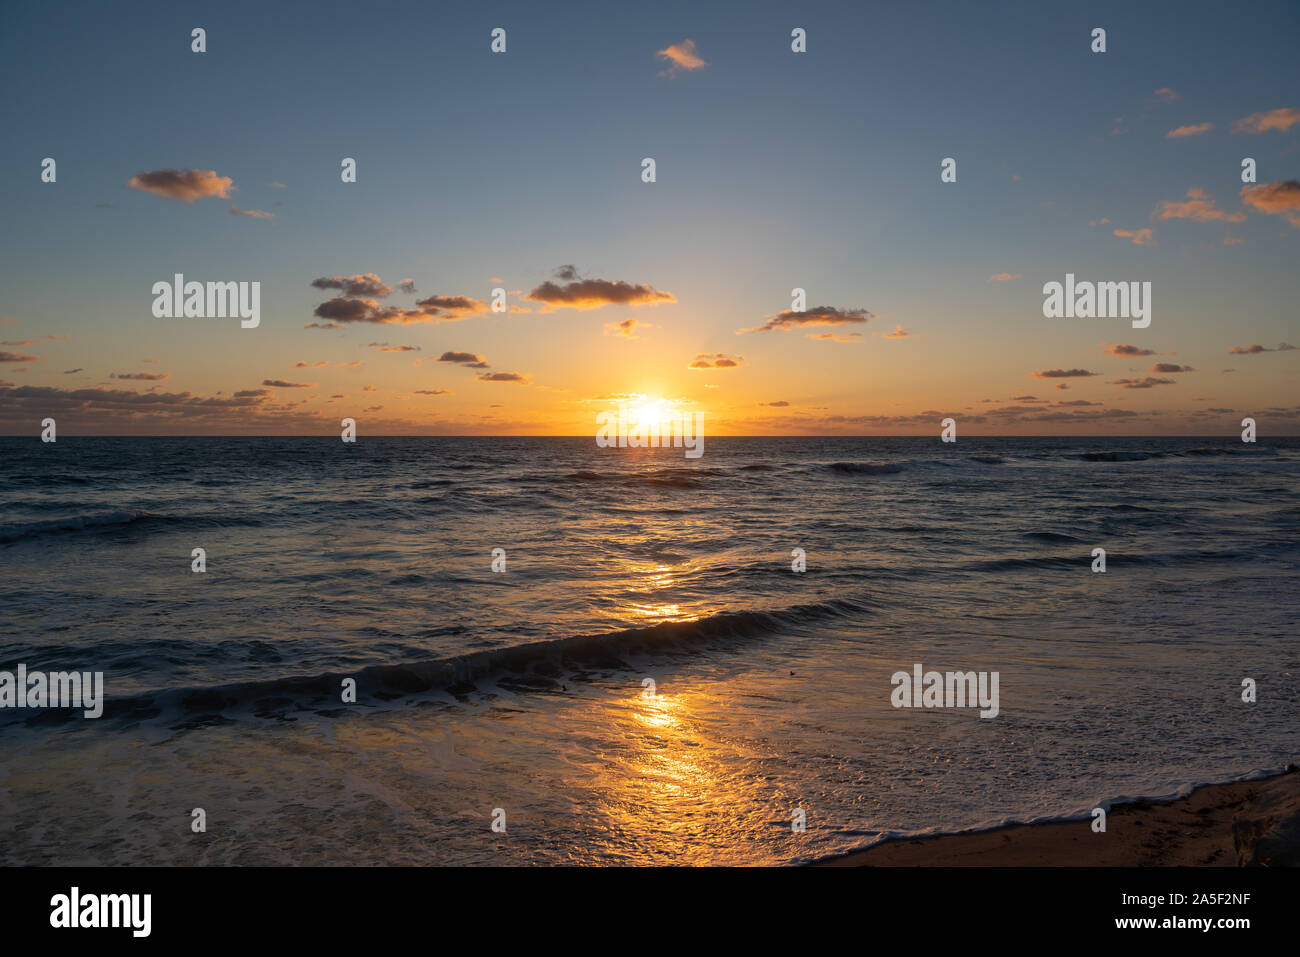 The almost clear sky gives a perfect view of the sunrise in Florida Stock Photo